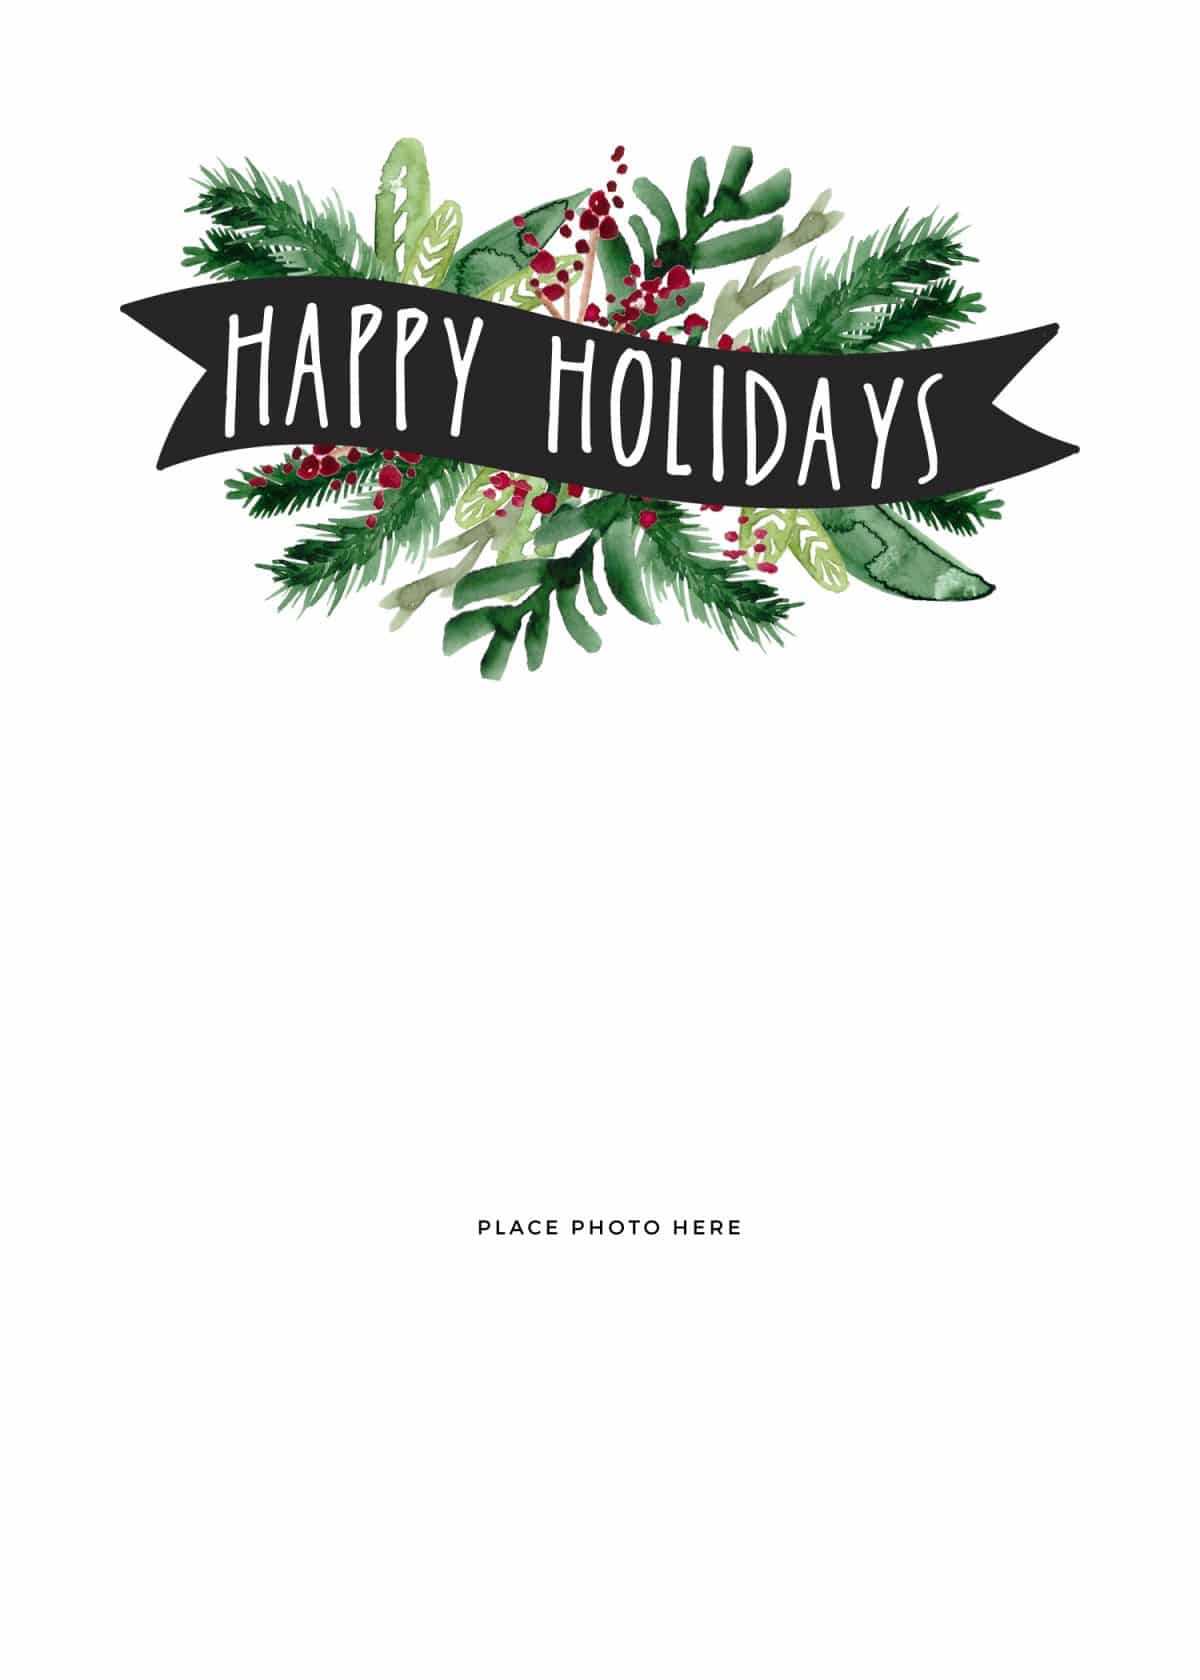 Make Your Own Photo Christmas Cards (For Free!) – Somewhat Inside Free Holiday Photo Card Templates